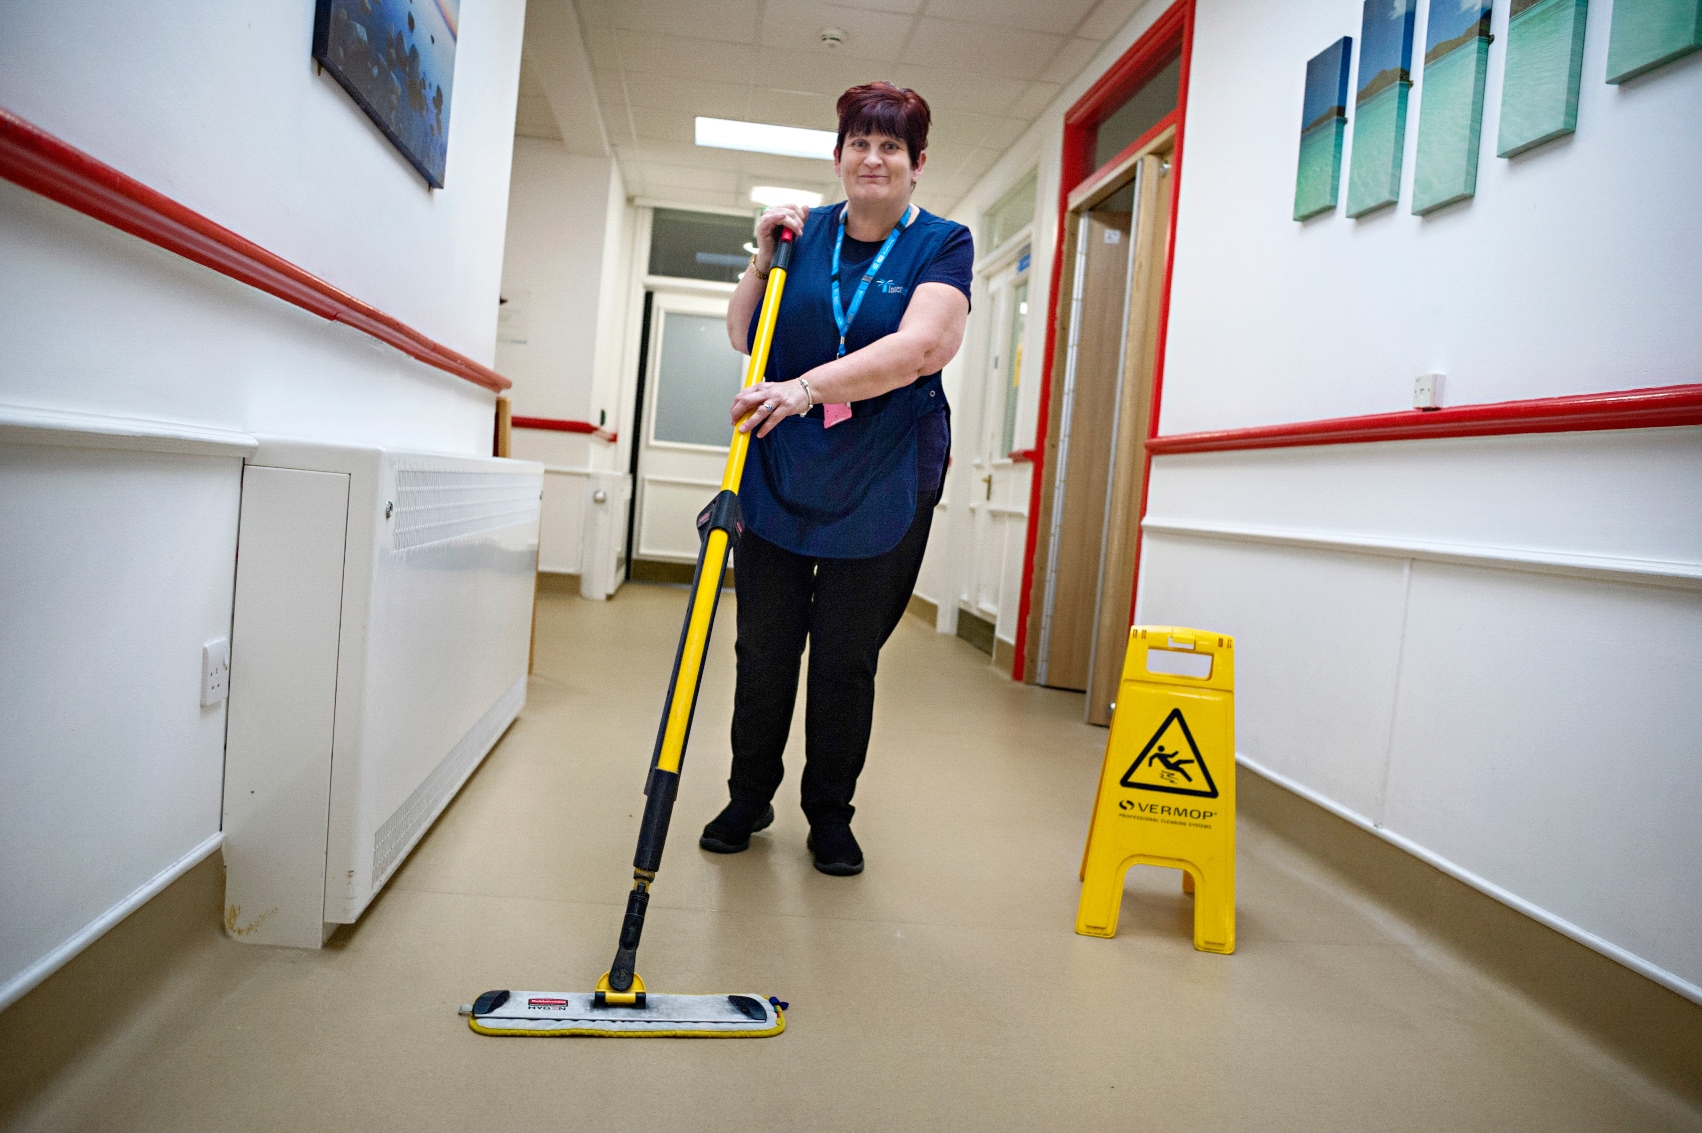 Experienced cleaners required for Dorset’s community hospitals